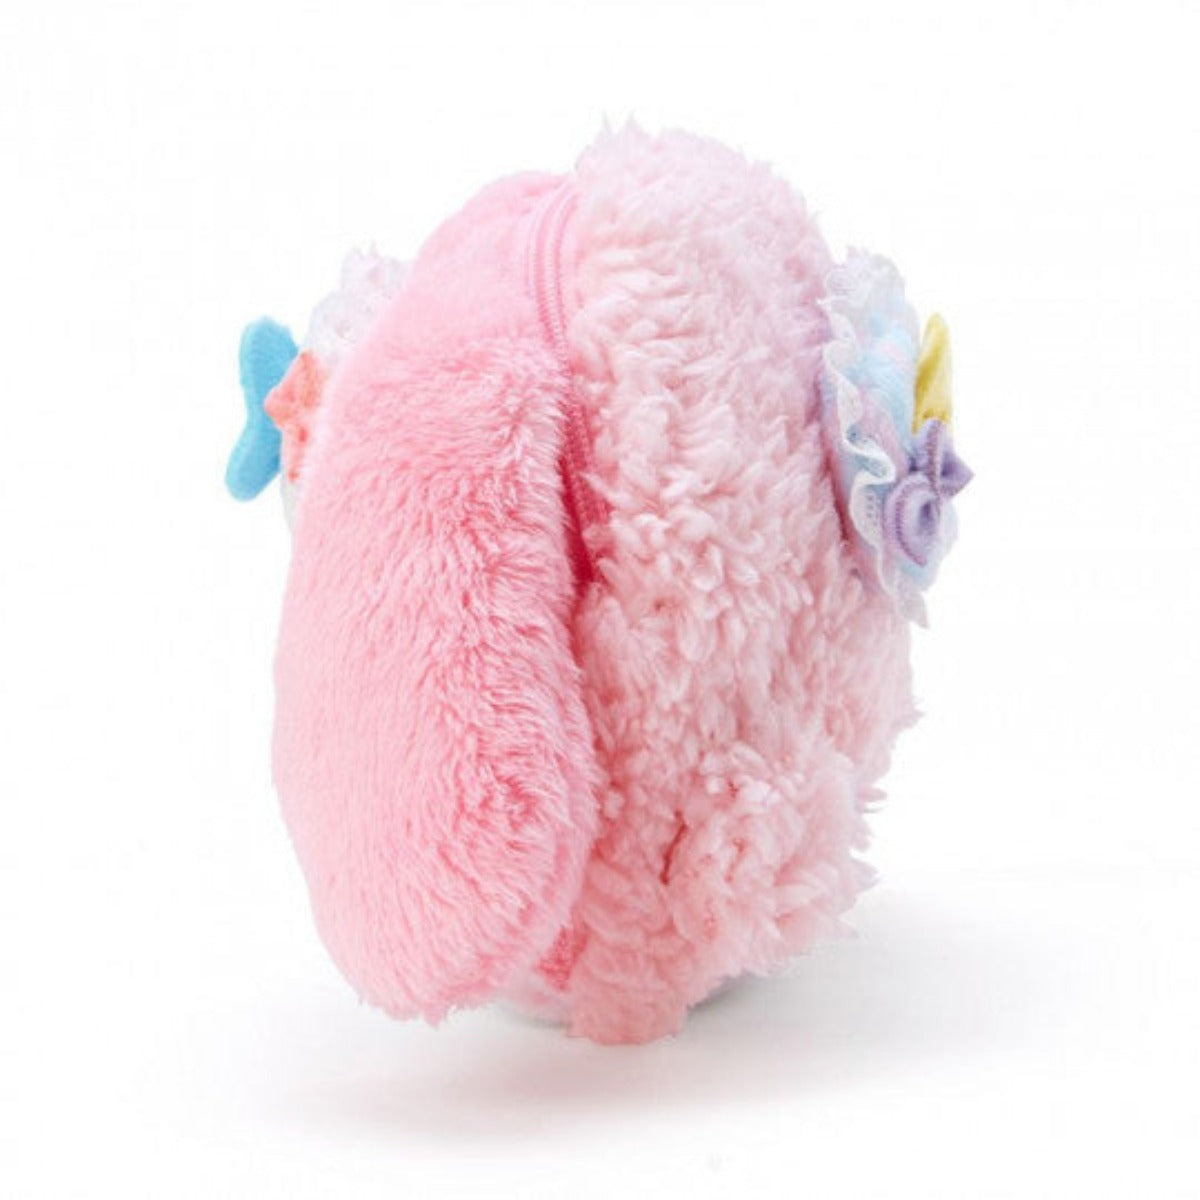 My Melody Pouch Plush Head Pink